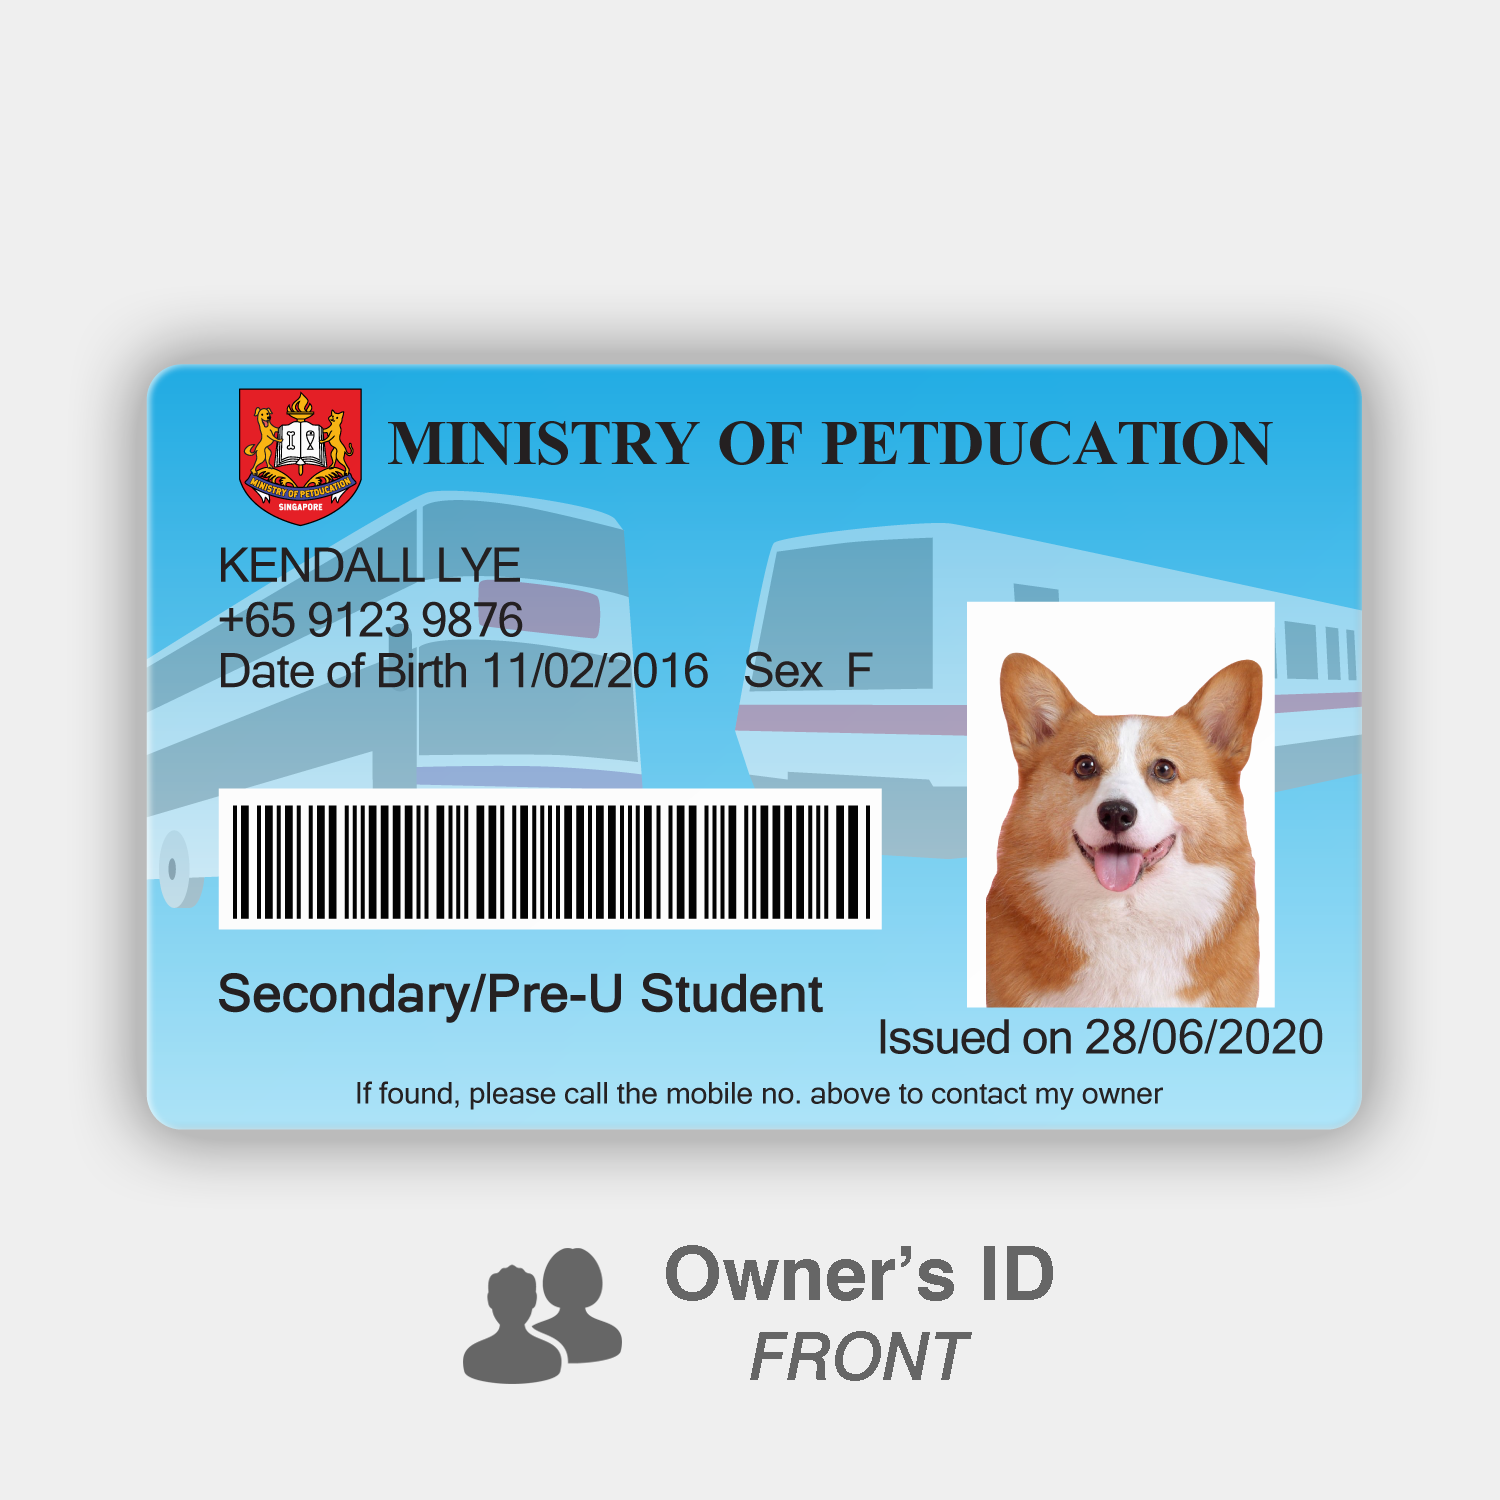 Petducation Secondary/Pre-U Student Pass - Owner's ID (Front)